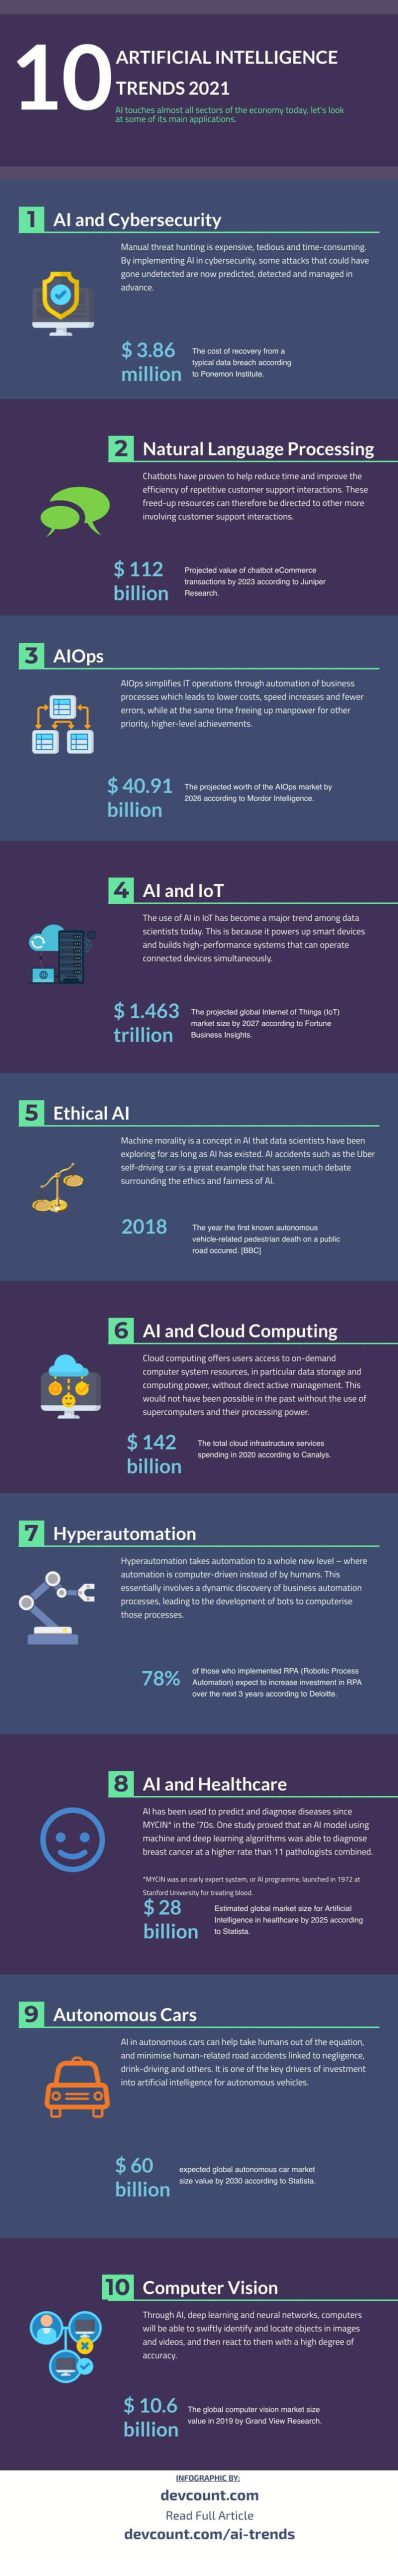 ai-trends-infographic